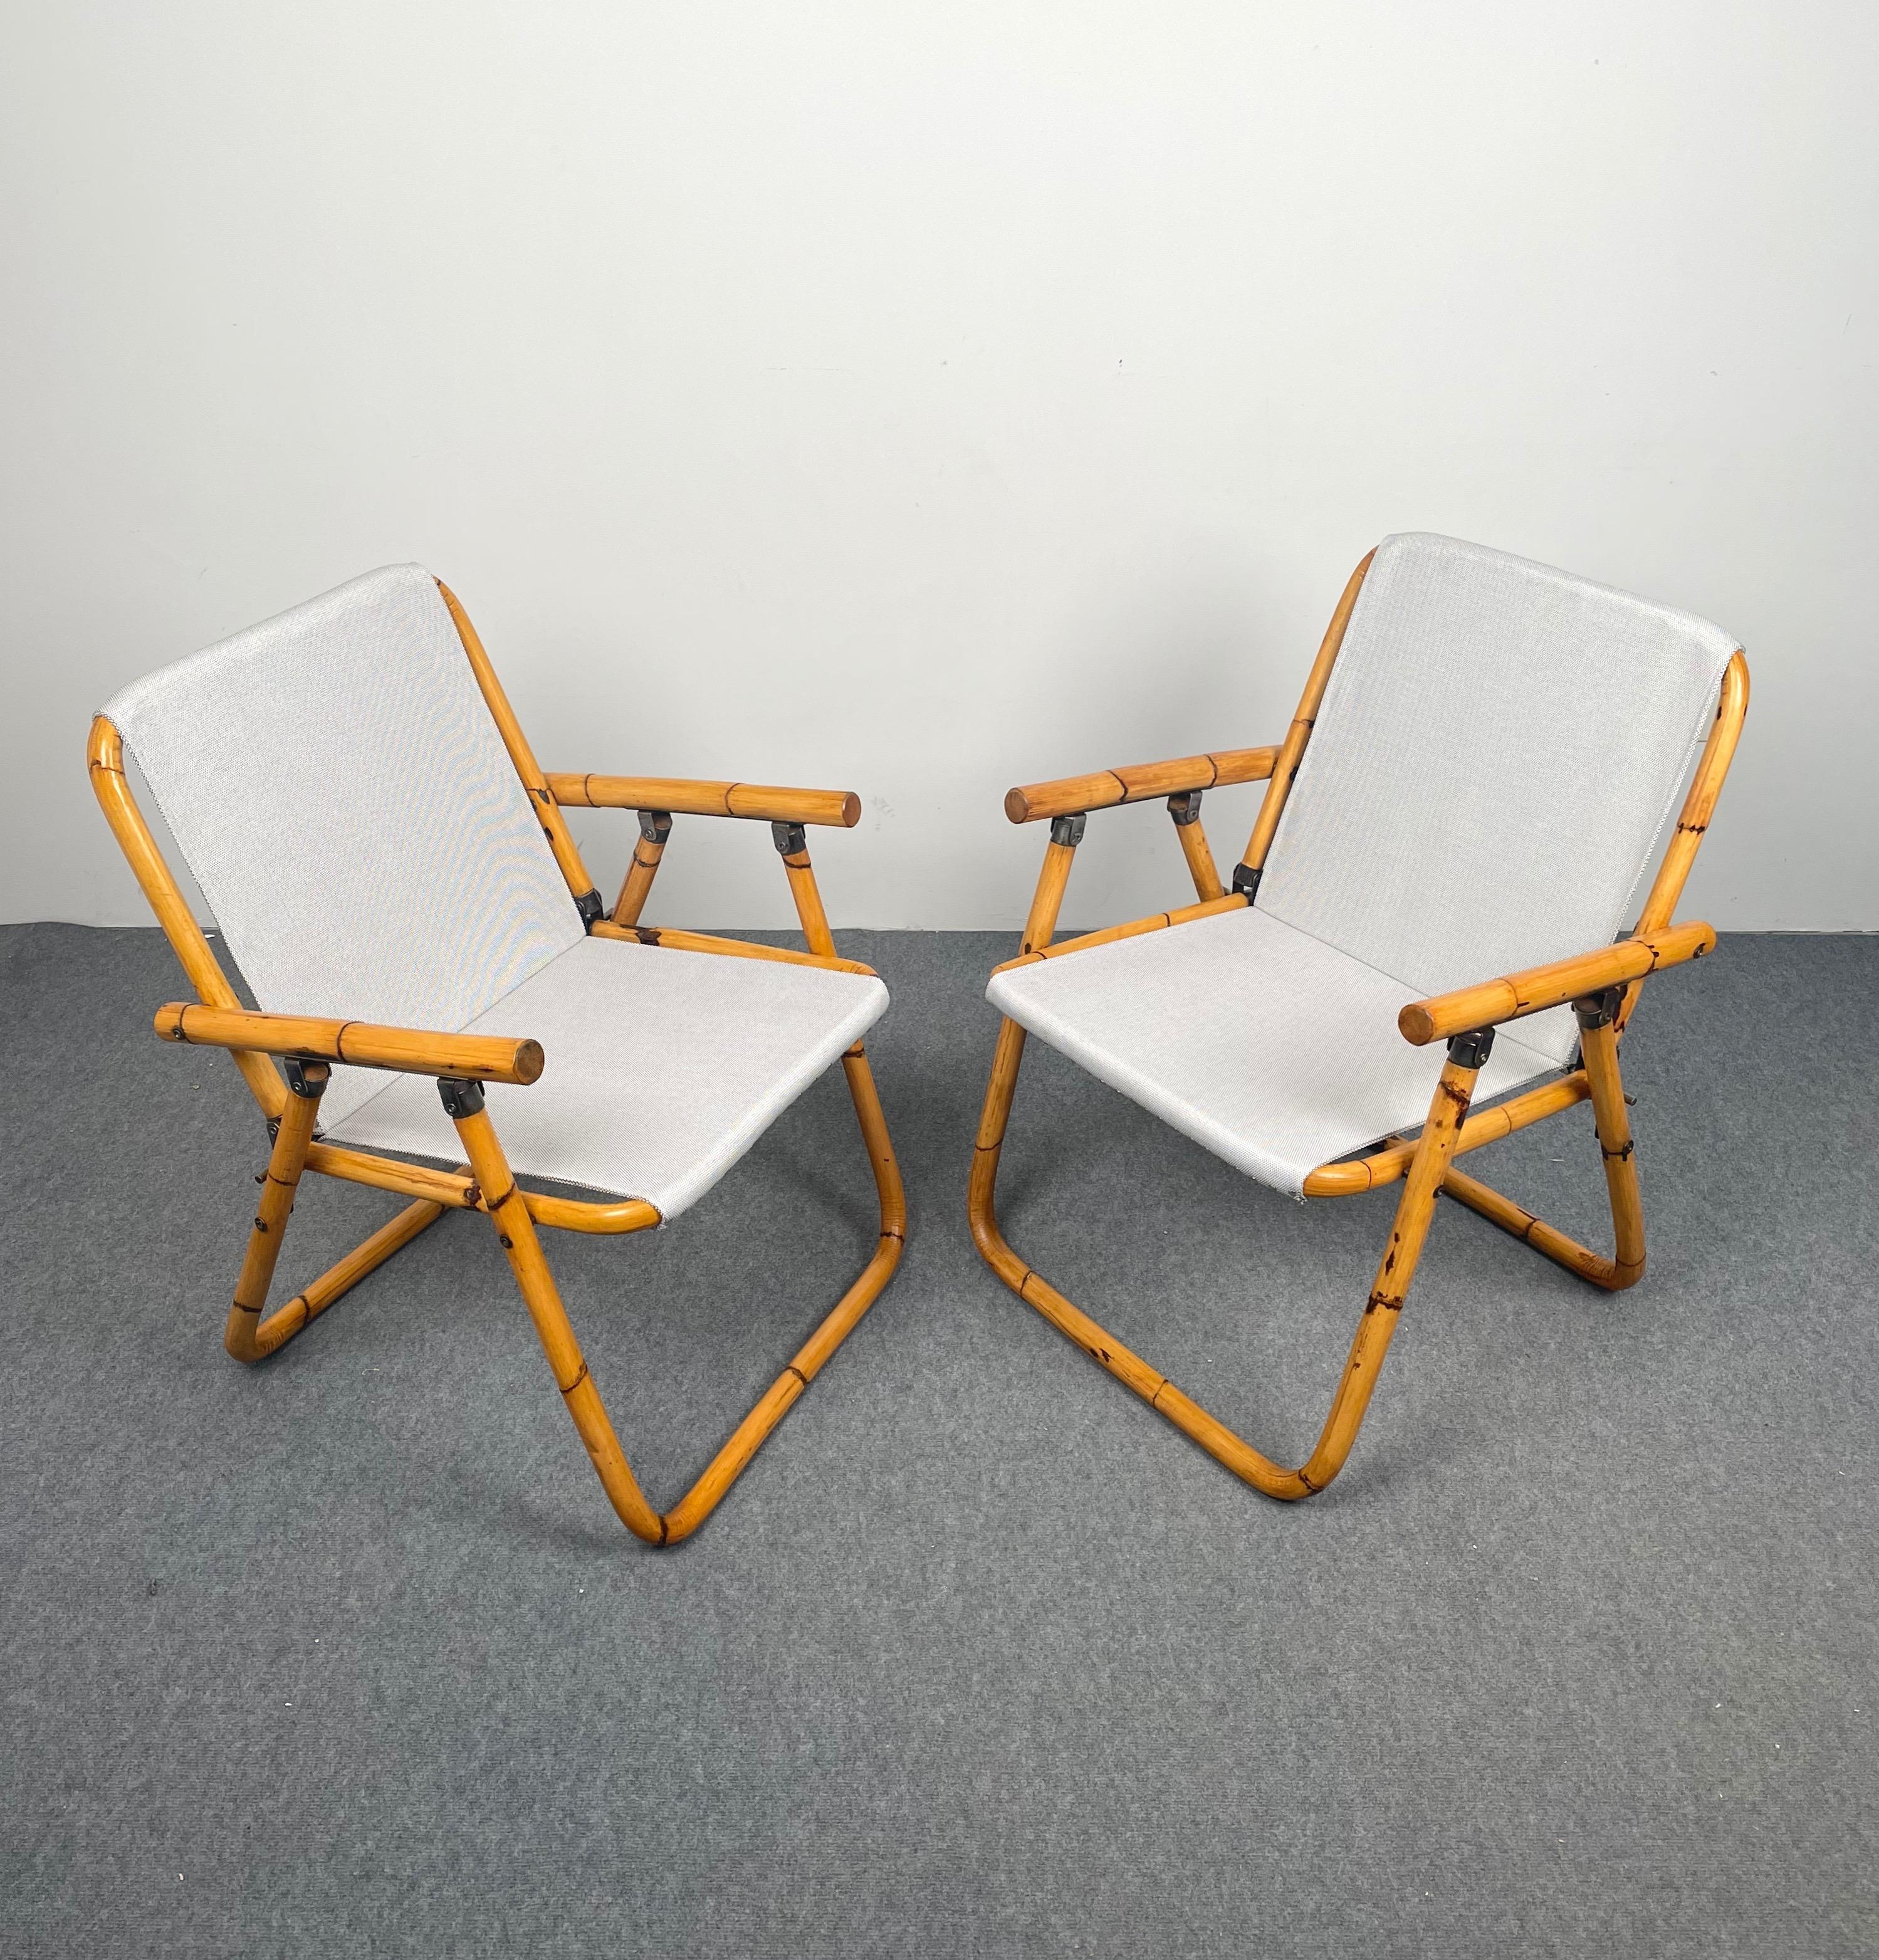 Pair of folding chairs in bamboo and fabric made in Italy in the 1960s. 
The chairs have been restored: the fabric is new and the bamboo has been polished.